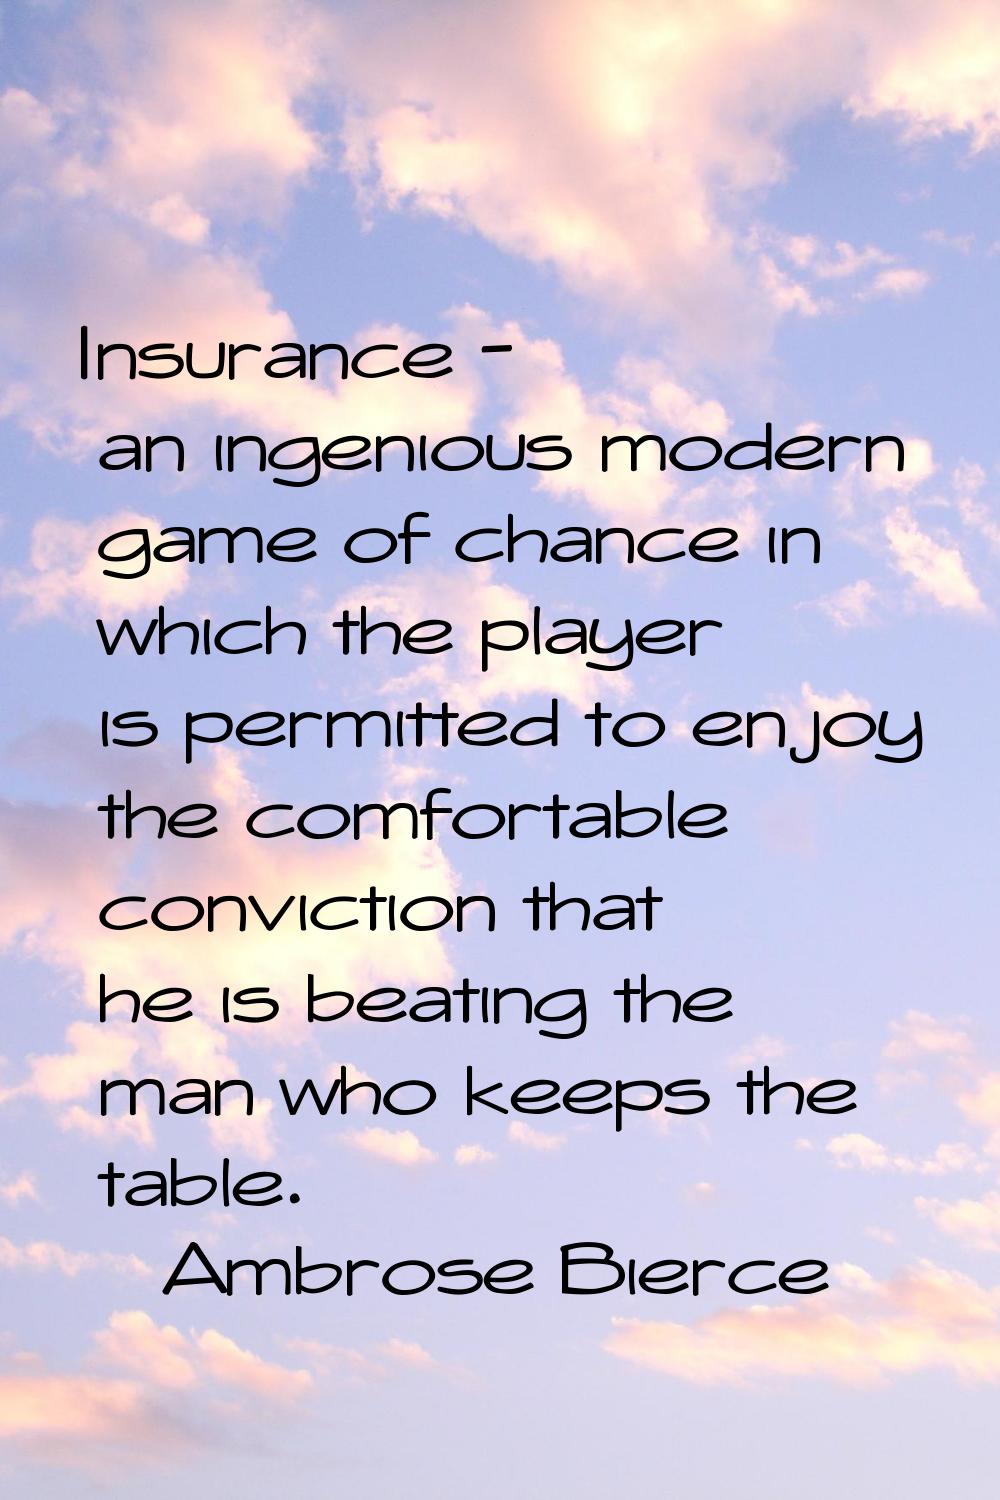 Insurance - an ingenious modern game of chance in which the player is permitted to enjoy the comfor